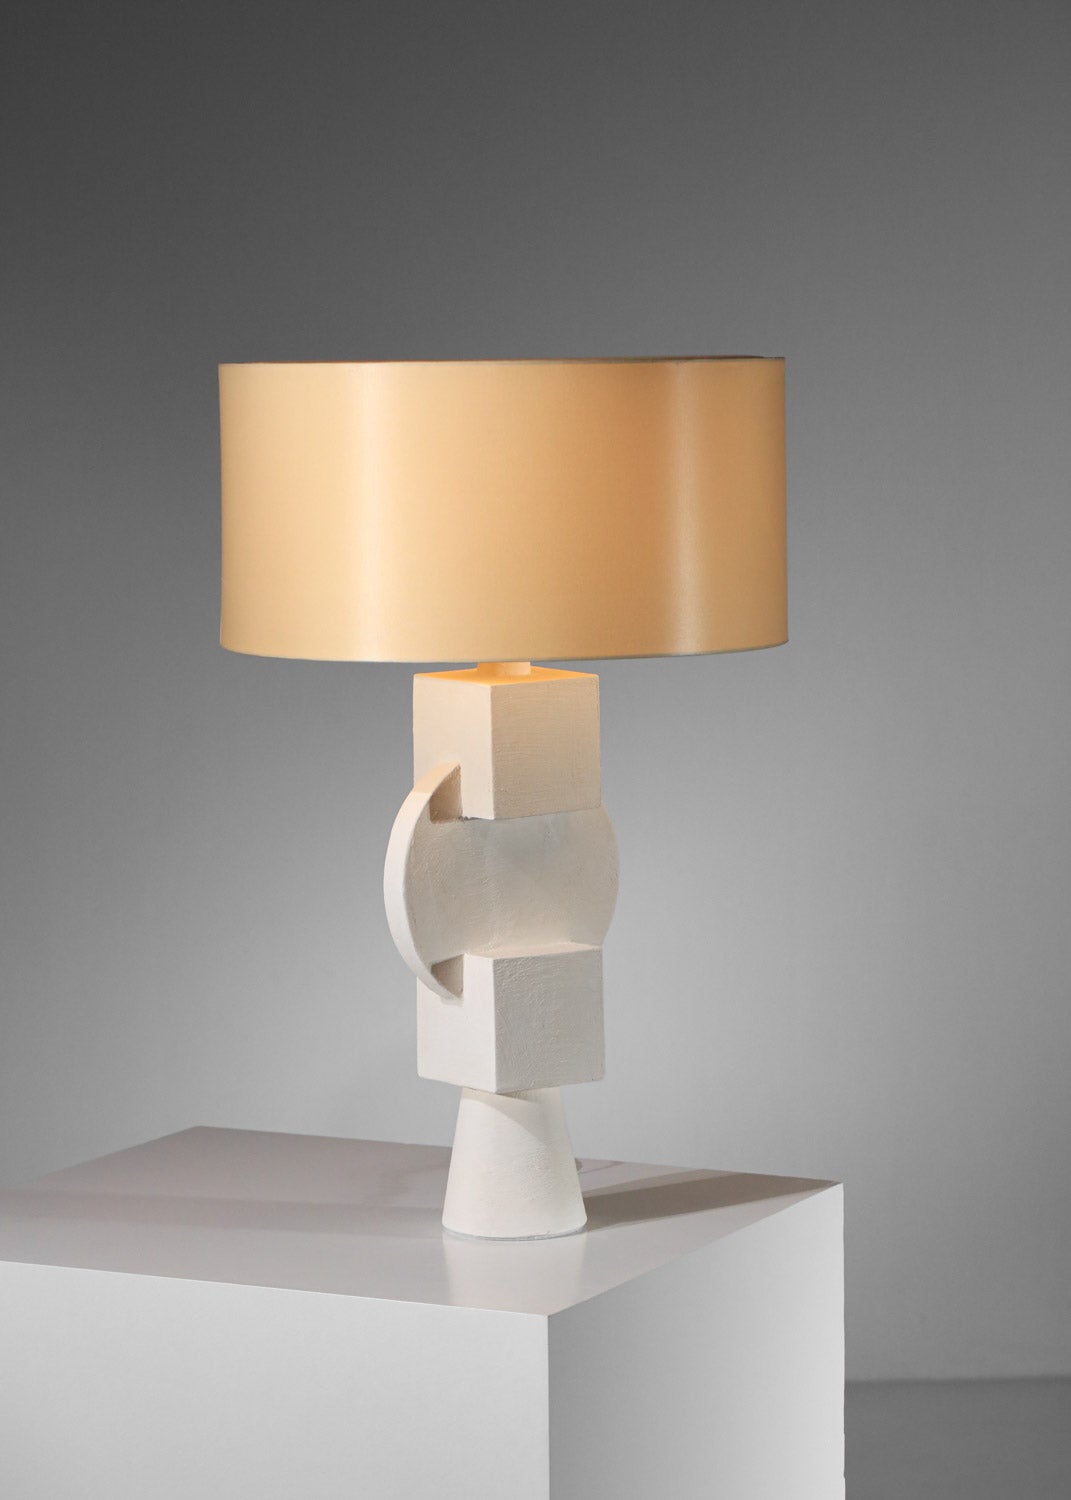 Large contemporary table lamp in the modernist style of the 1940s. White plaster base structure with geometric shapes for a very decorative and sculptural effect. Quality craftsmanship. Quantity on request. Recommended LED bulb type E27.